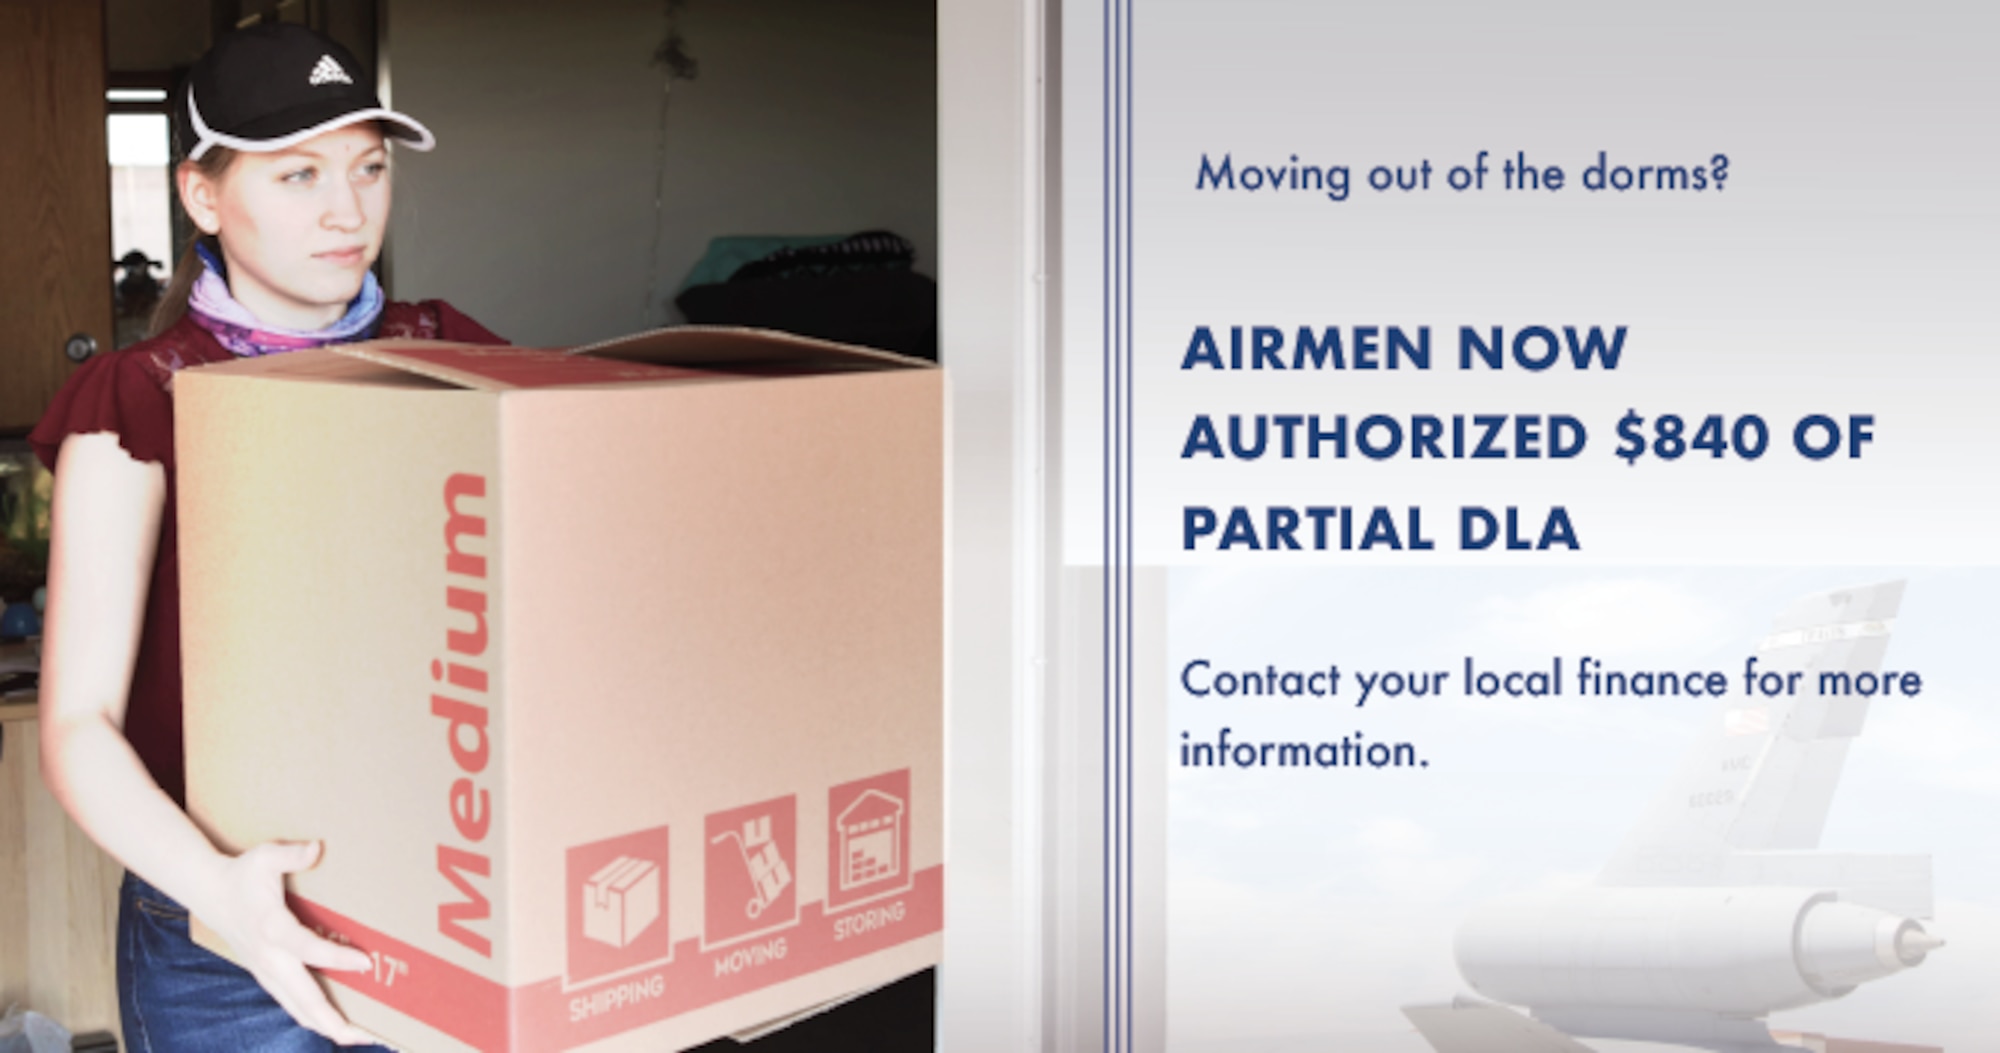 A recent modification to the joint travel regulation now allows Airmen directed to move out of government quarters to receive a partial dislocation allowance of $840. (U.S. Air Force graphic)